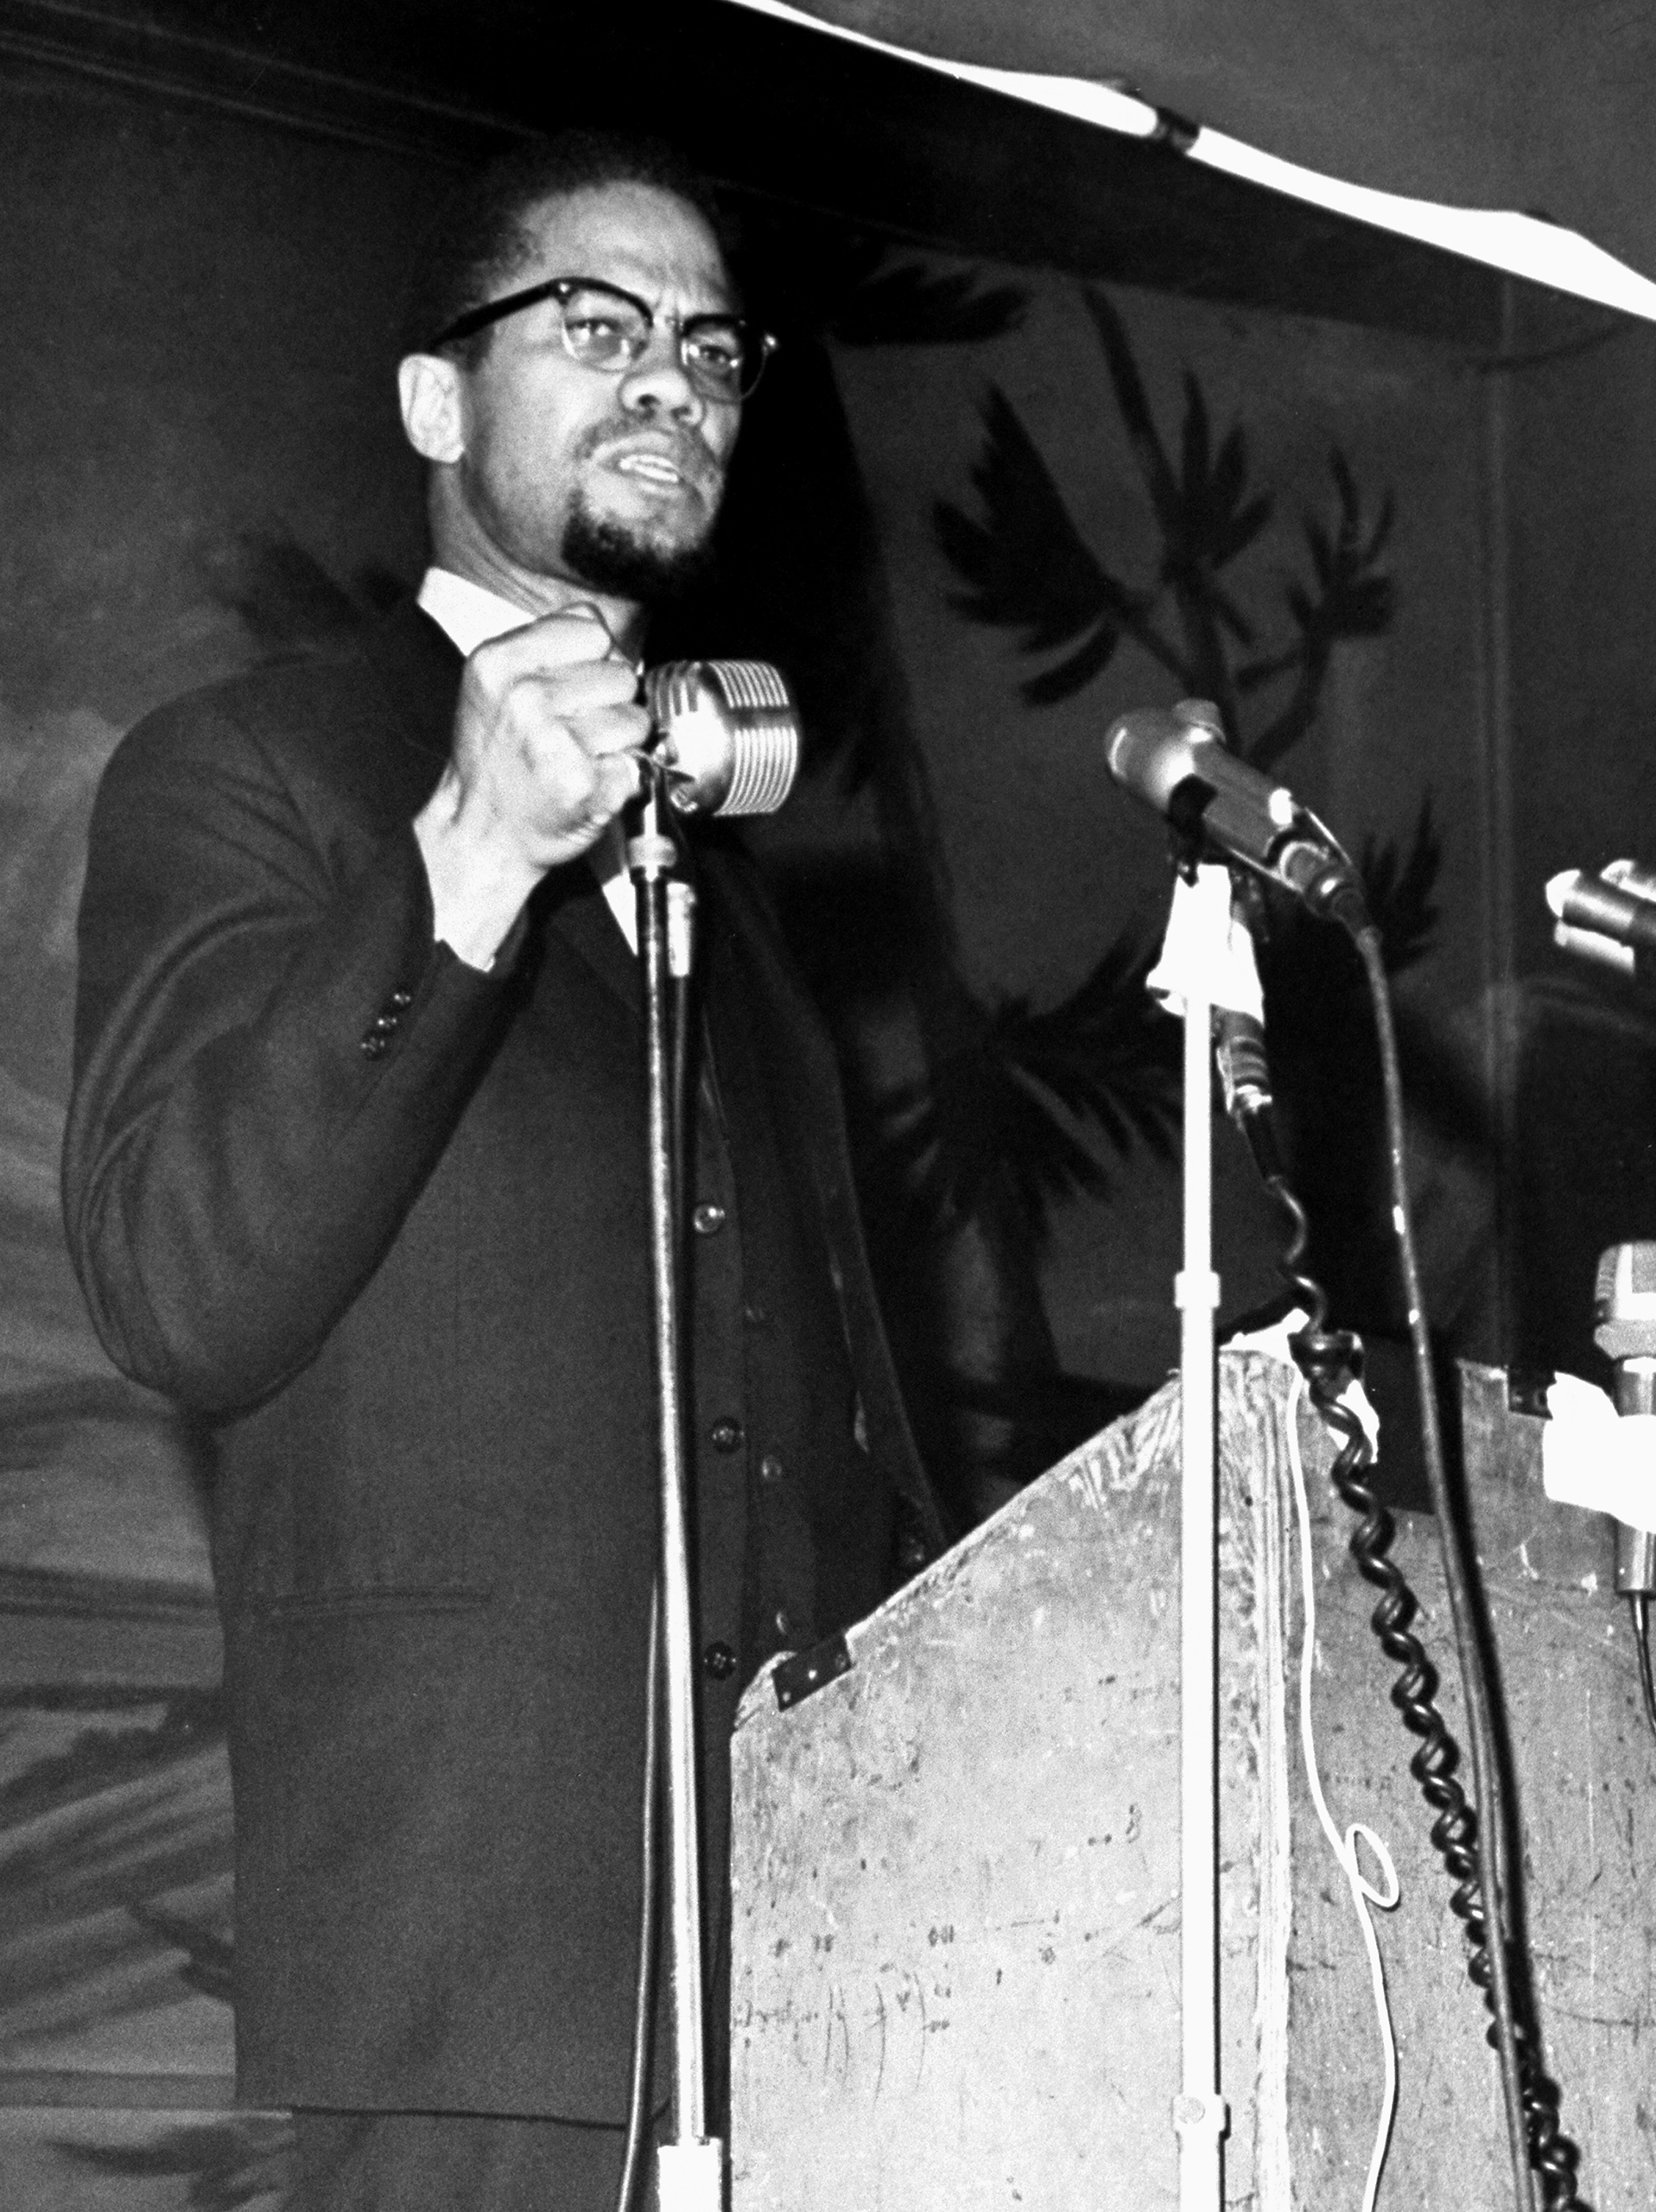 Malcolm X speaks at the Audubon Ballroom in Harlem on Feb. 15, 1965. (Bill Quinn/NY Daily News Archive via Getty Images)